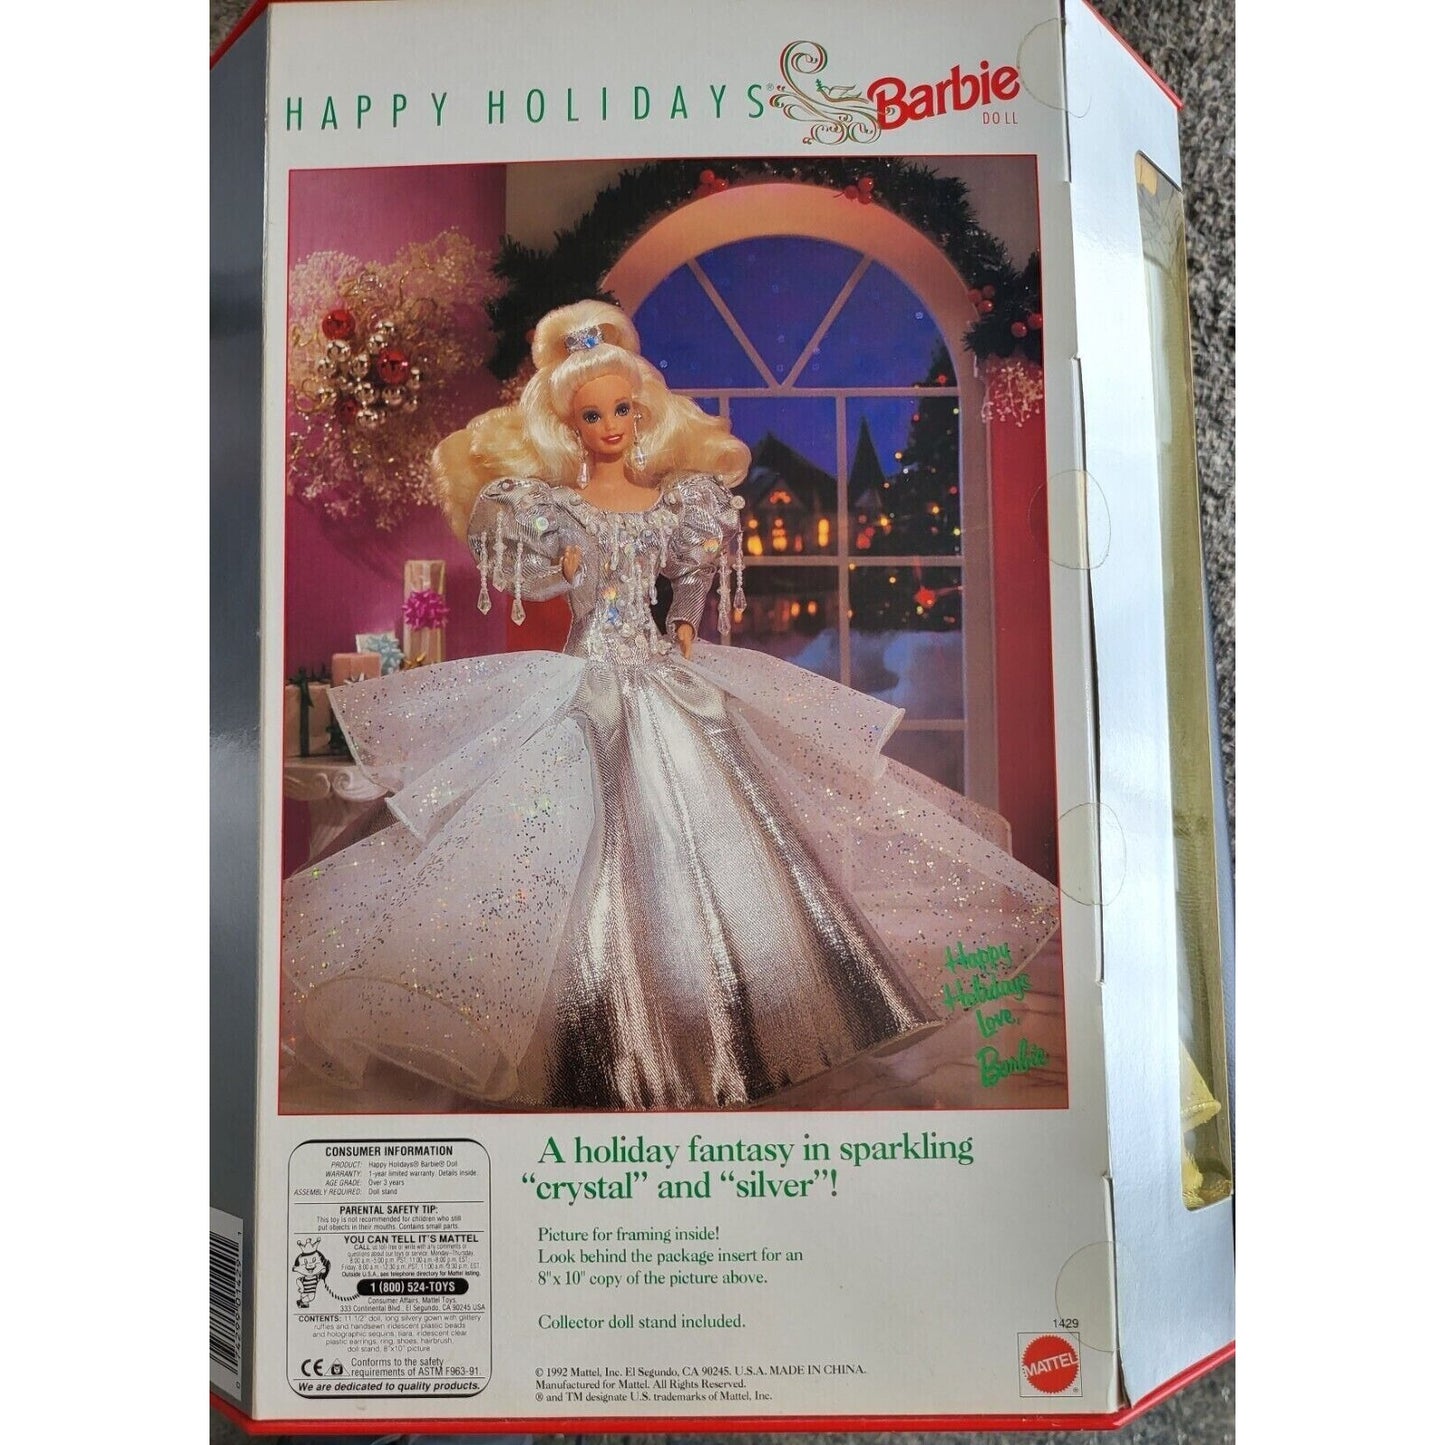 1992 Happy Holidays Barbie Doll Mattel Special Edition Silver & White Dress NRFB